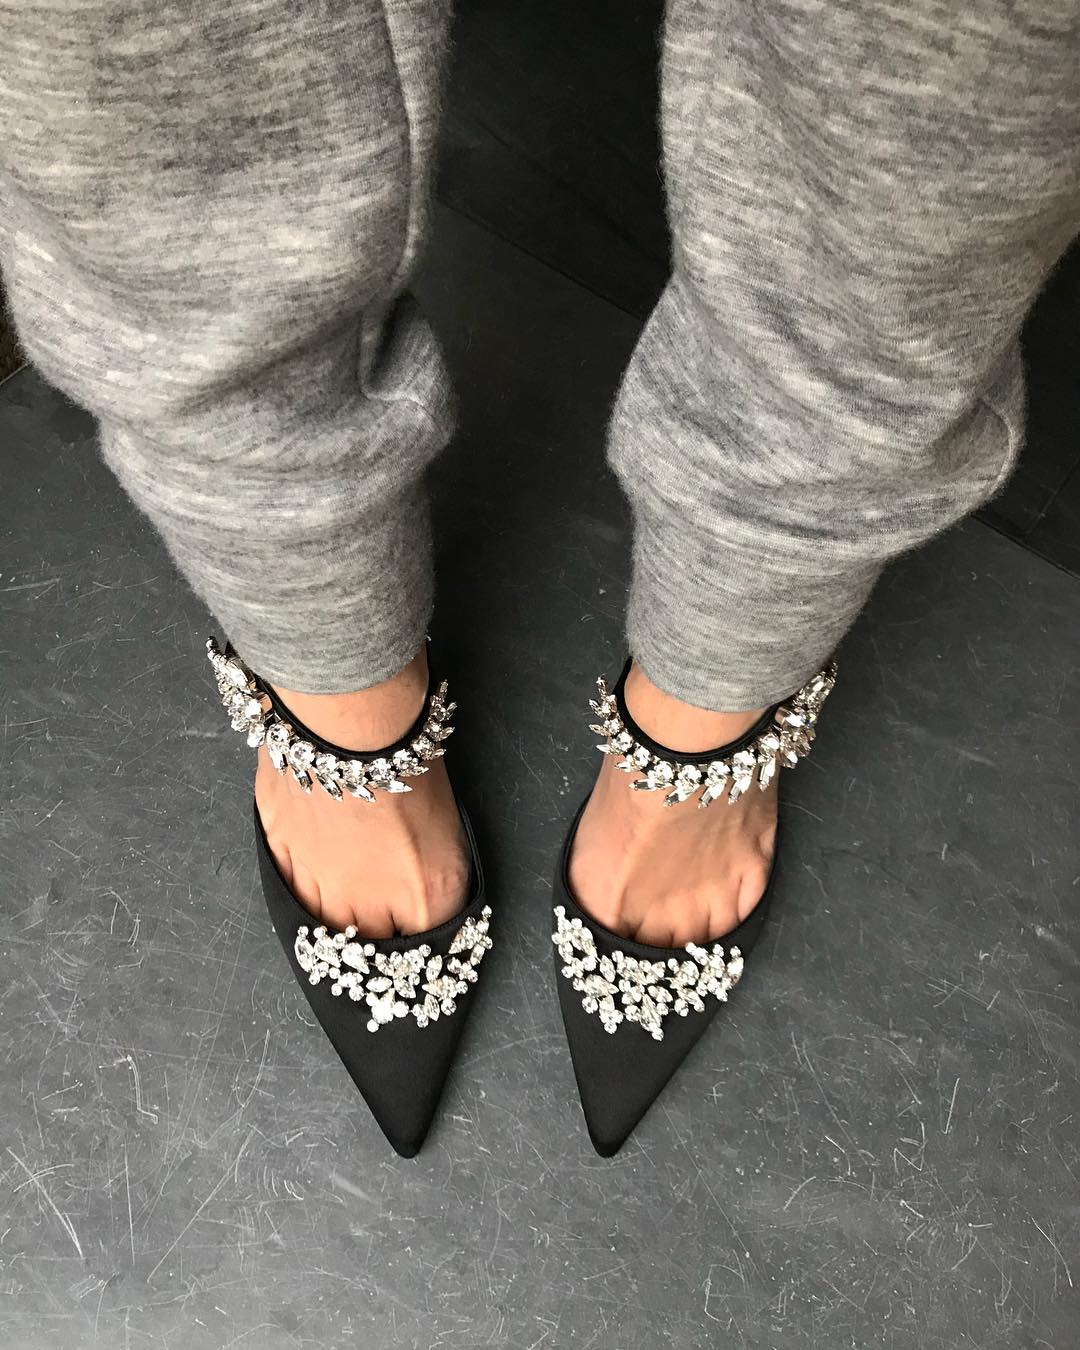 16 Pairs of Jeweled Shoes We are Obsessed With